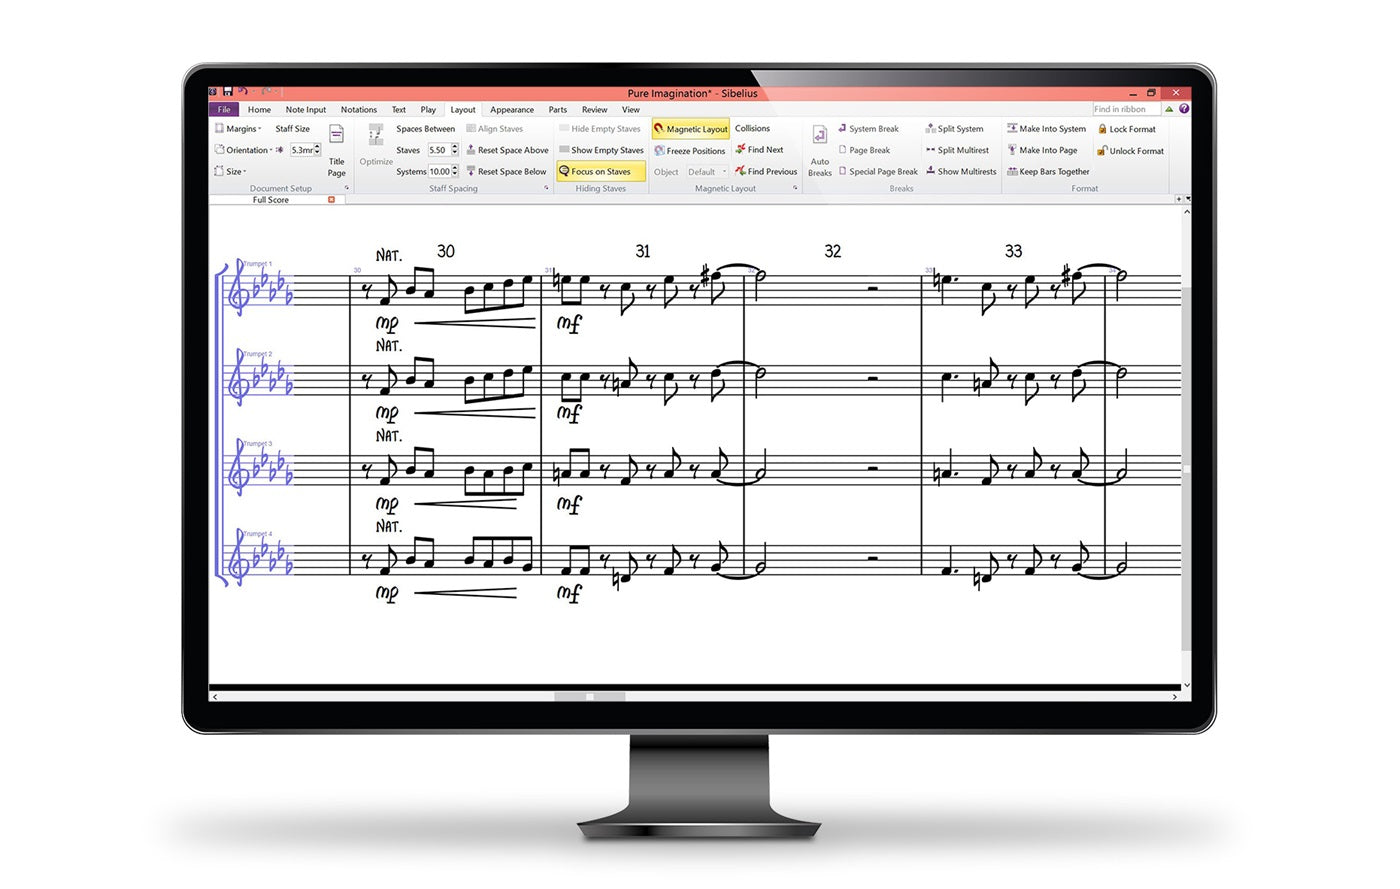 Avid Sibelius Annual Subscription with Upgrade Plan